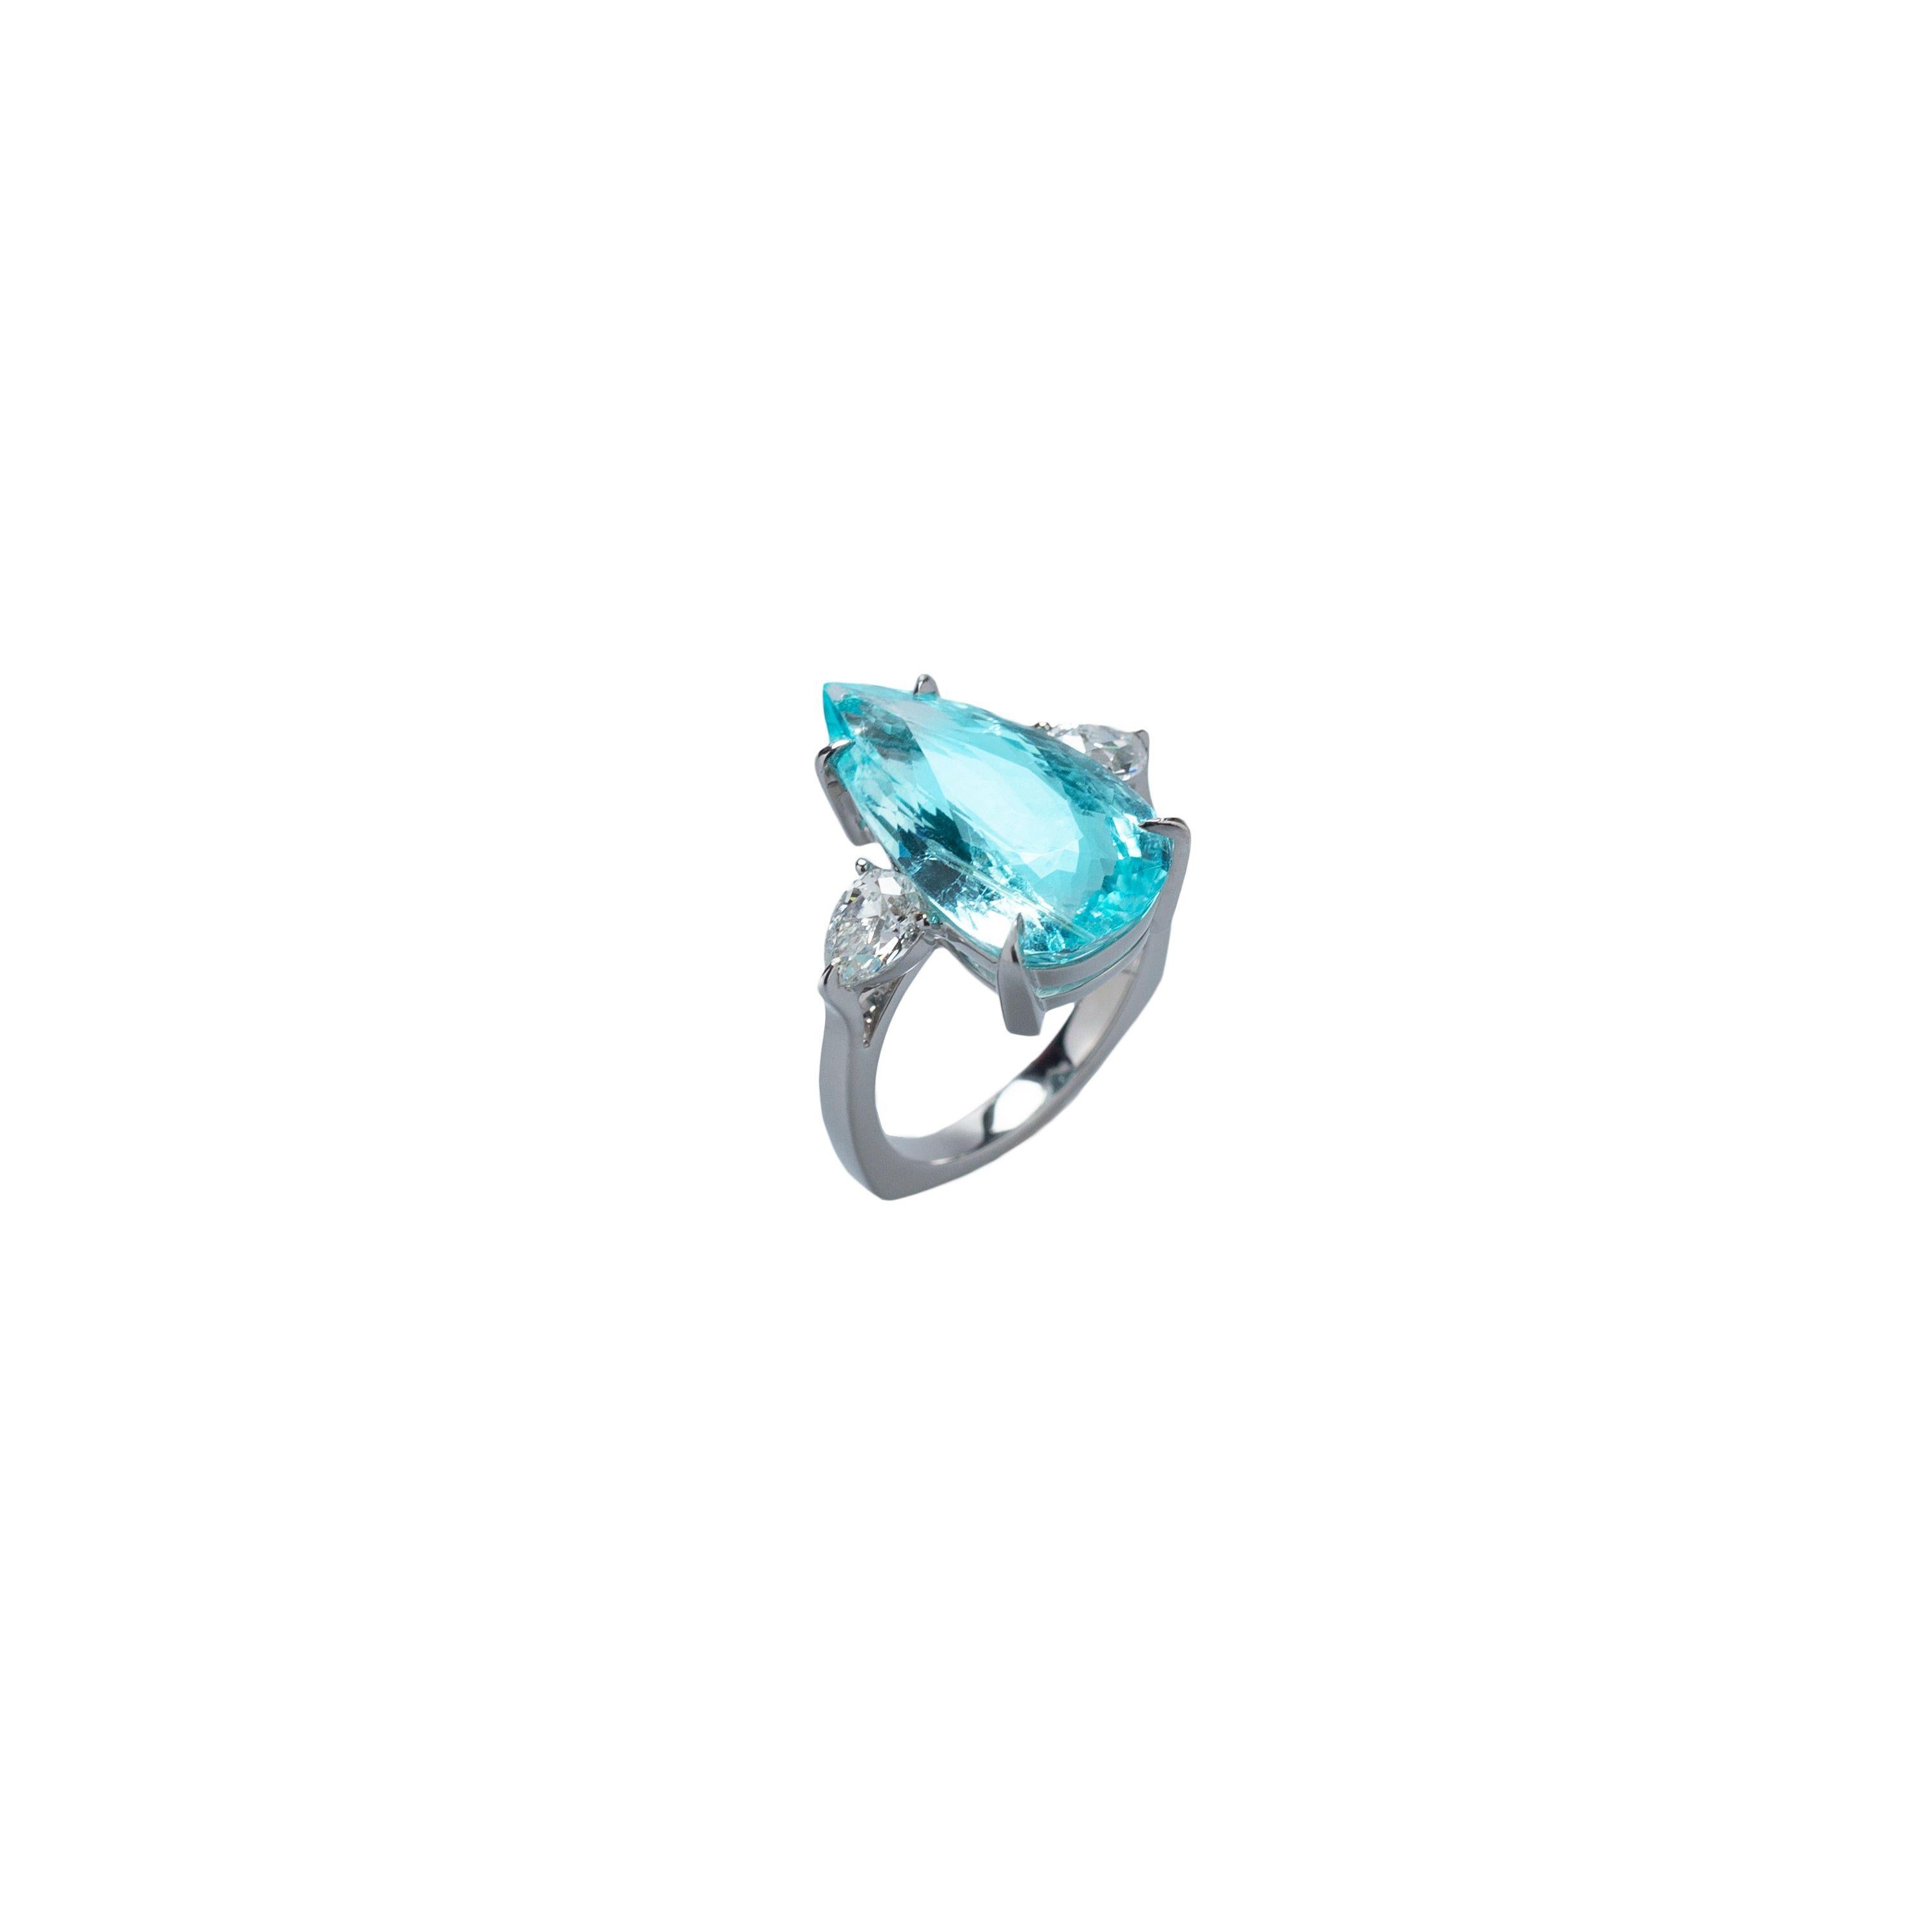 Oval Cut Paraiba Tourmaline 8, 60ct 18K White Gold Ring For Sale